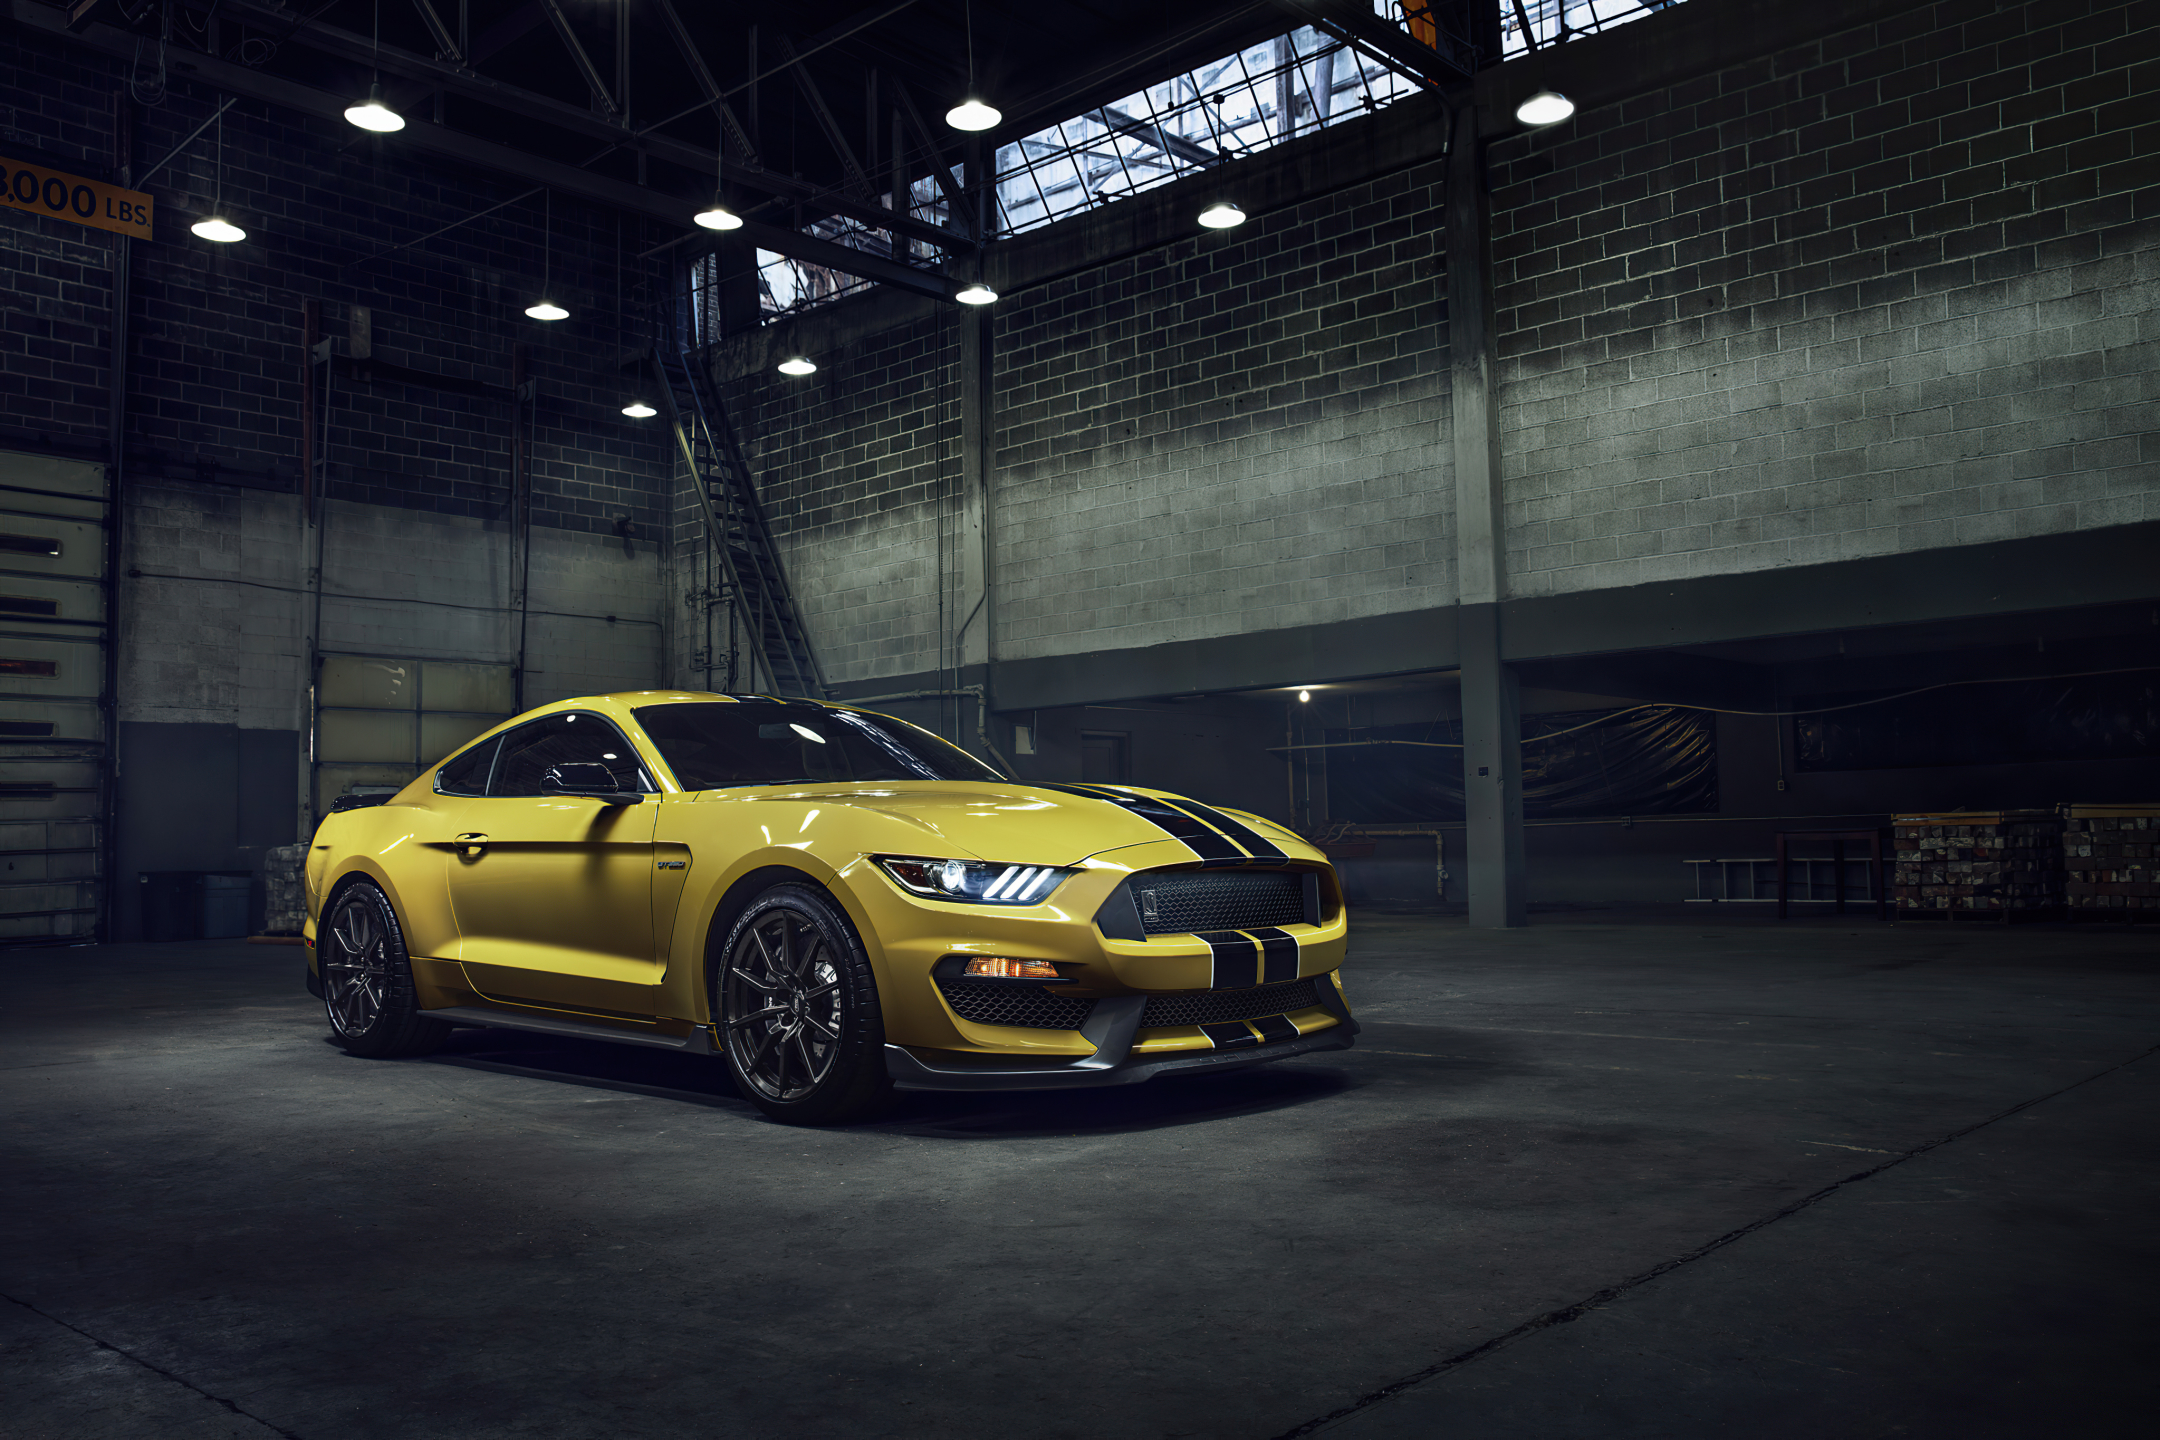 ford mustang, vehicles, ford mustang gt350, fford mustang gt350, yellow car, ford, muscle car, car cellphone